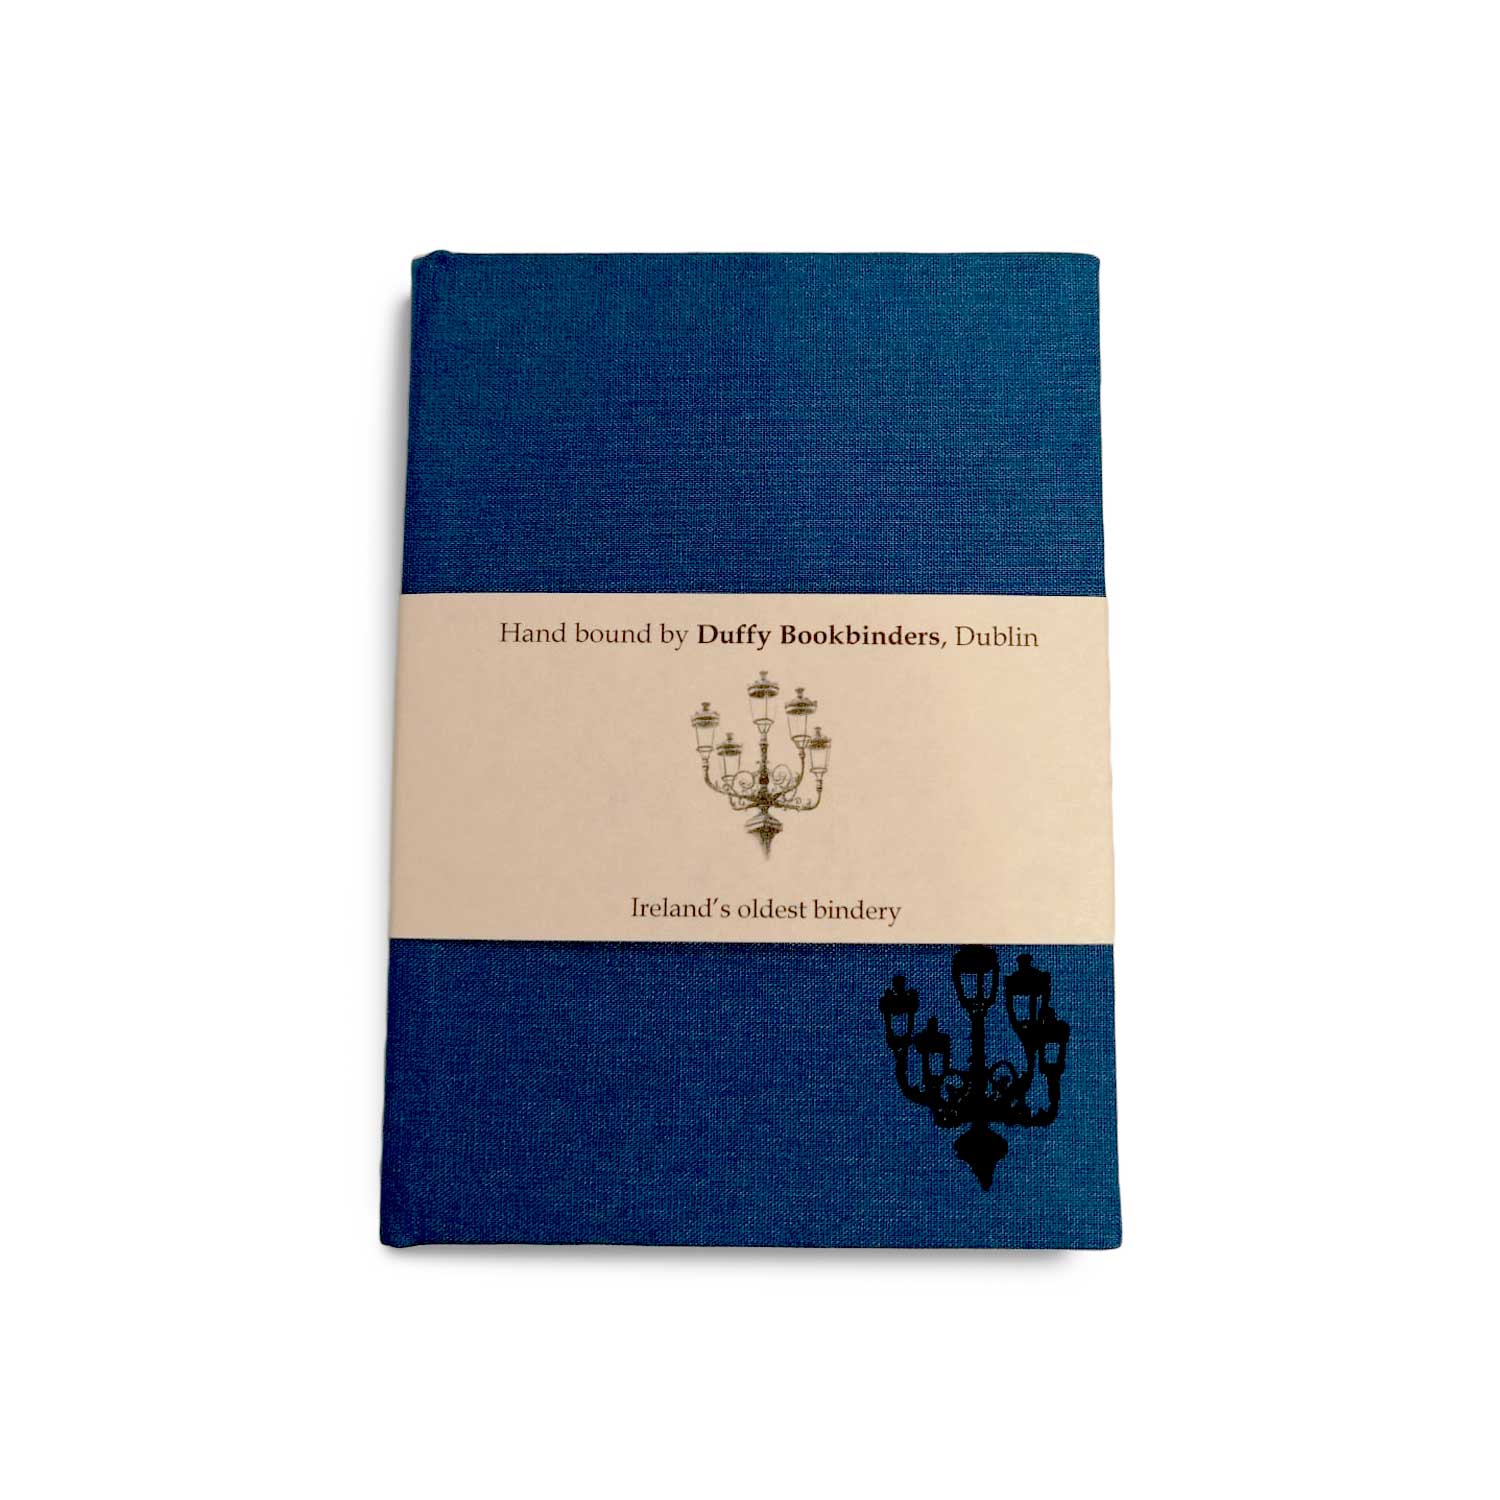 A blue clothbound notebook with a cream belly band around the centre. There is a simple line illustration of a street lamp with five lanterns in the bottom right corner of the notebook and on the band.